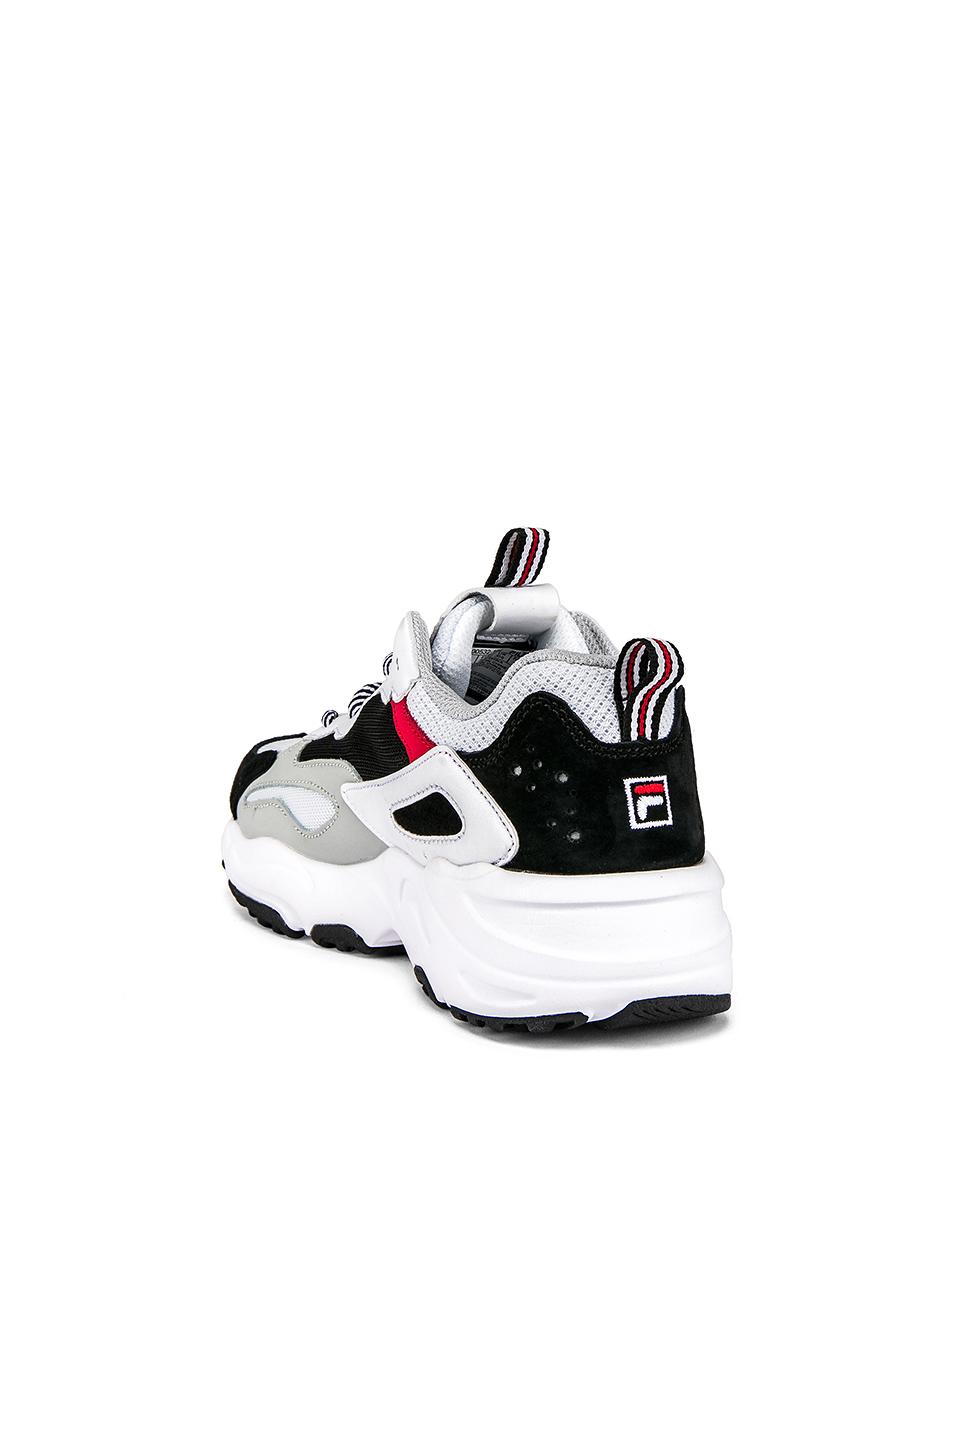 Fila Ray Tracer in Black/White/Red (White) - Lyst